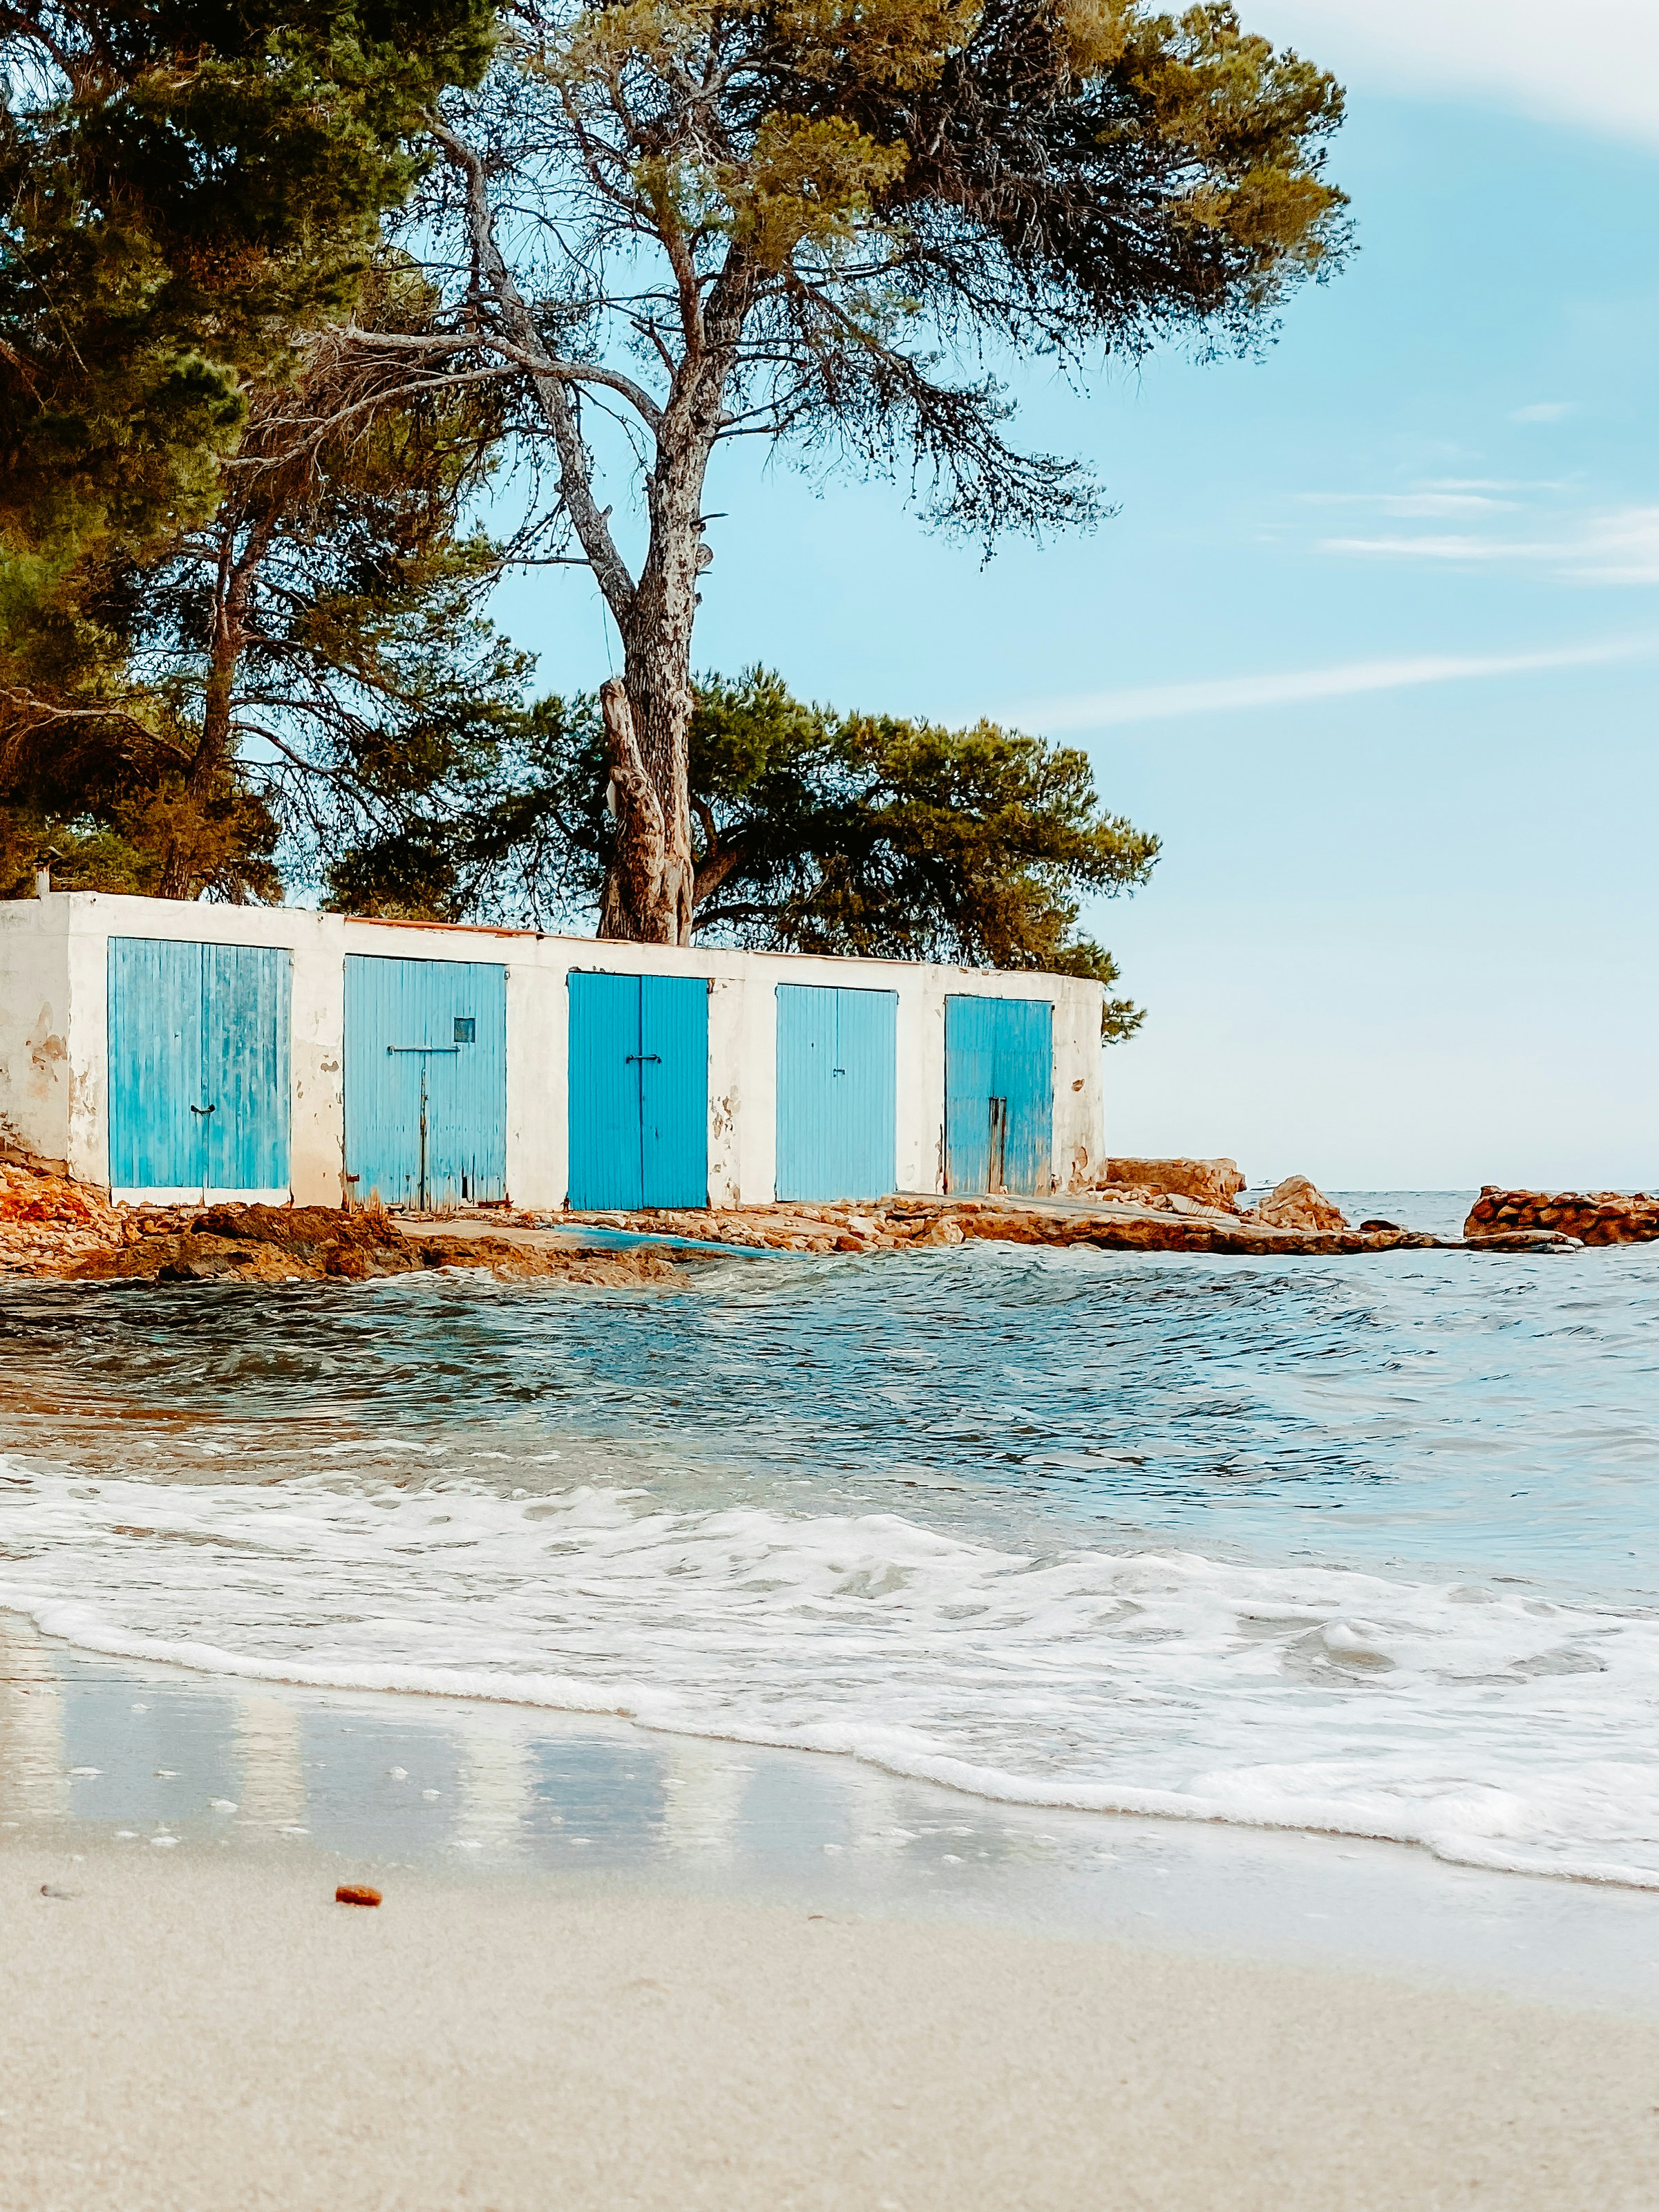 Beach Cala Pada, with romantic little 'Casetas Varadero' fisherman's huts, build between the rocks all around the coast in Ibiza. Look at these beautiful Caribbean colored ones. 𝚆𝚎𝚎𝚔𝚕𝚢 𝚗𝚎𝚠 𝚙𝚑𝚘𝚝𝚘𝚜 𝚘𝚏 𝙸𝚋𝚒𝚣𝚊. 𝙻𝚎𝚝'𝚜 𝚌𝚘𝚗𝚗𝚎𝚌𝚝 𝚘𝚗 𝙸𝚗𝚜𝚝𝚊𝚐𝚛𝚊𝚖 @𝚒𝚋𝚒𝚣𝚊.𝚒.𝚋.𝚒.𝚣.𝚊.𝚒𝚋𝚒𝚣𝚊